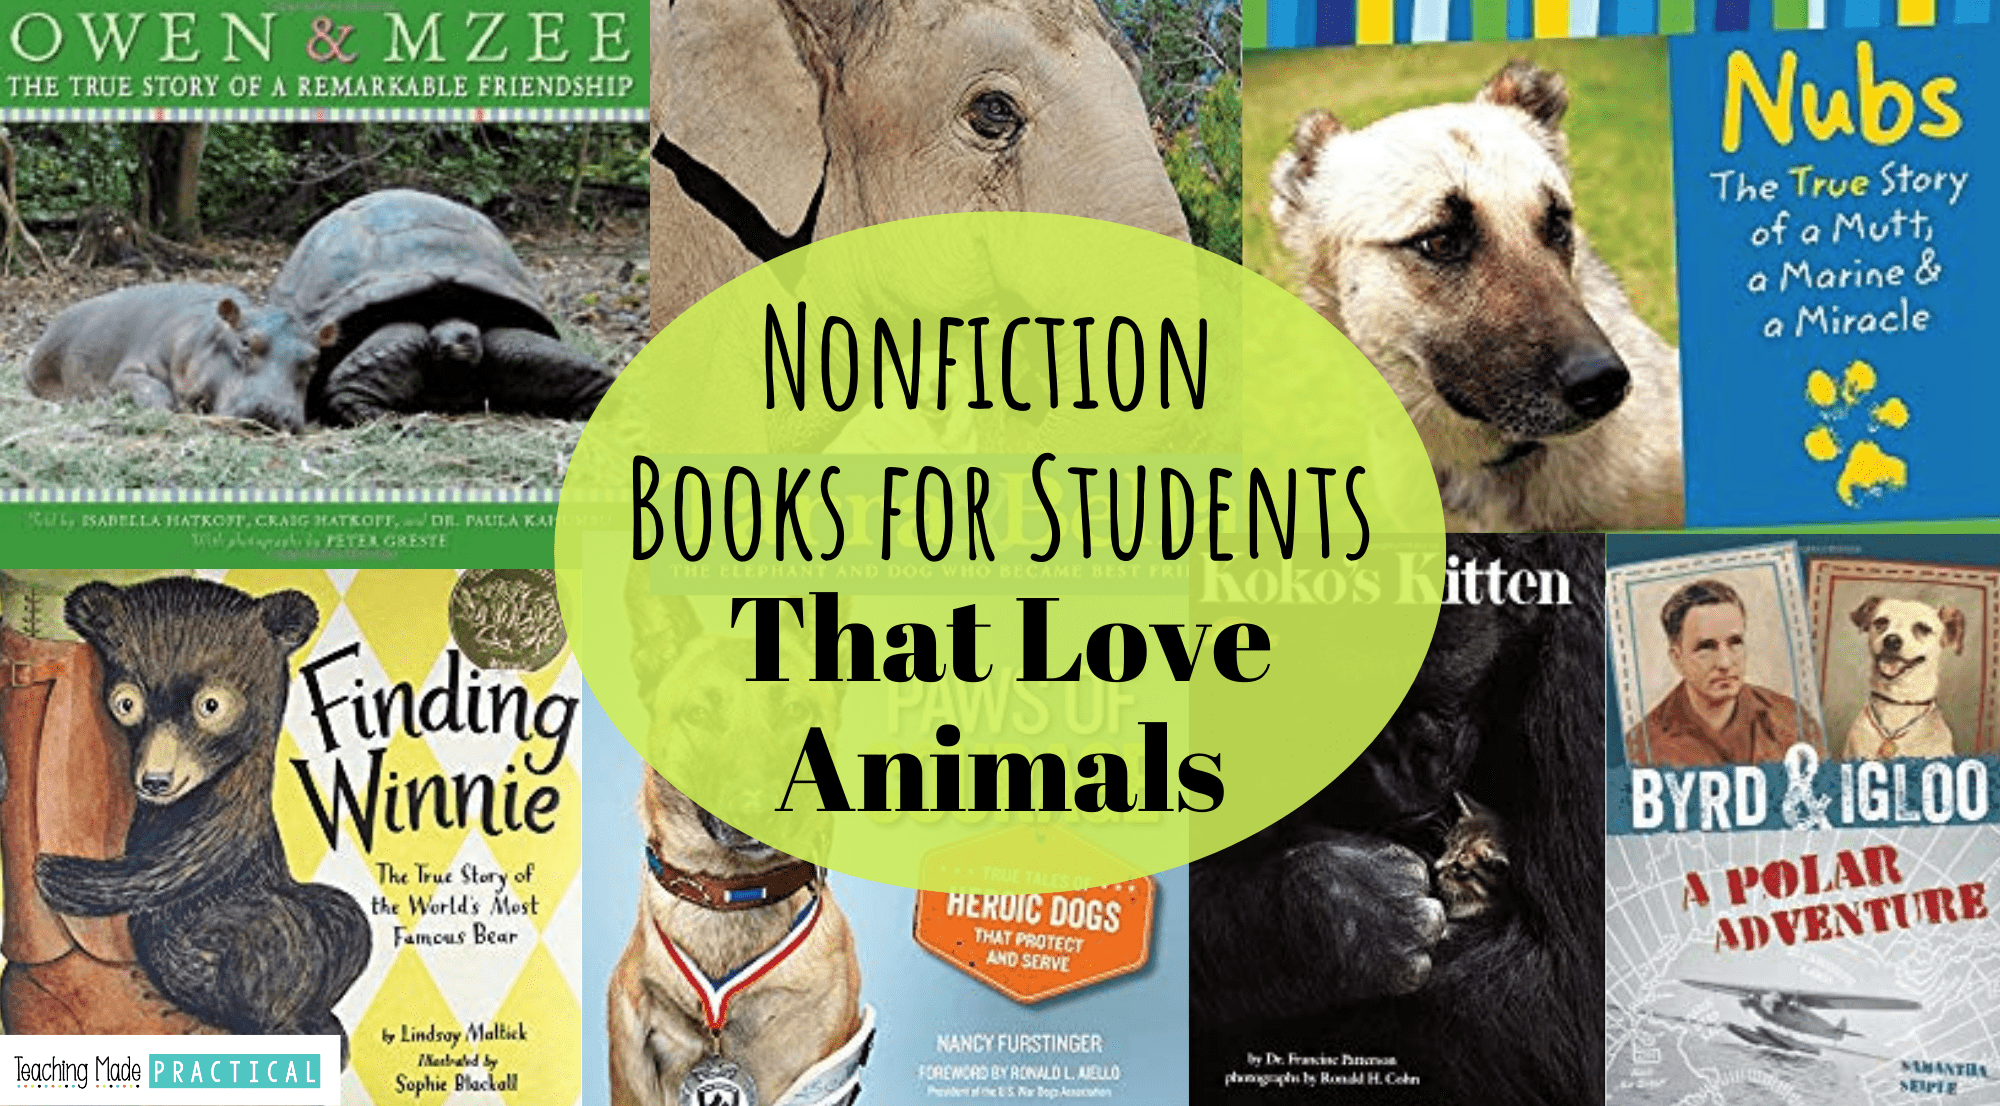 Encourage reluctant readers with engaging nonfiction books about animals for 3rd grade, 4th grade, and 5th grade students.  